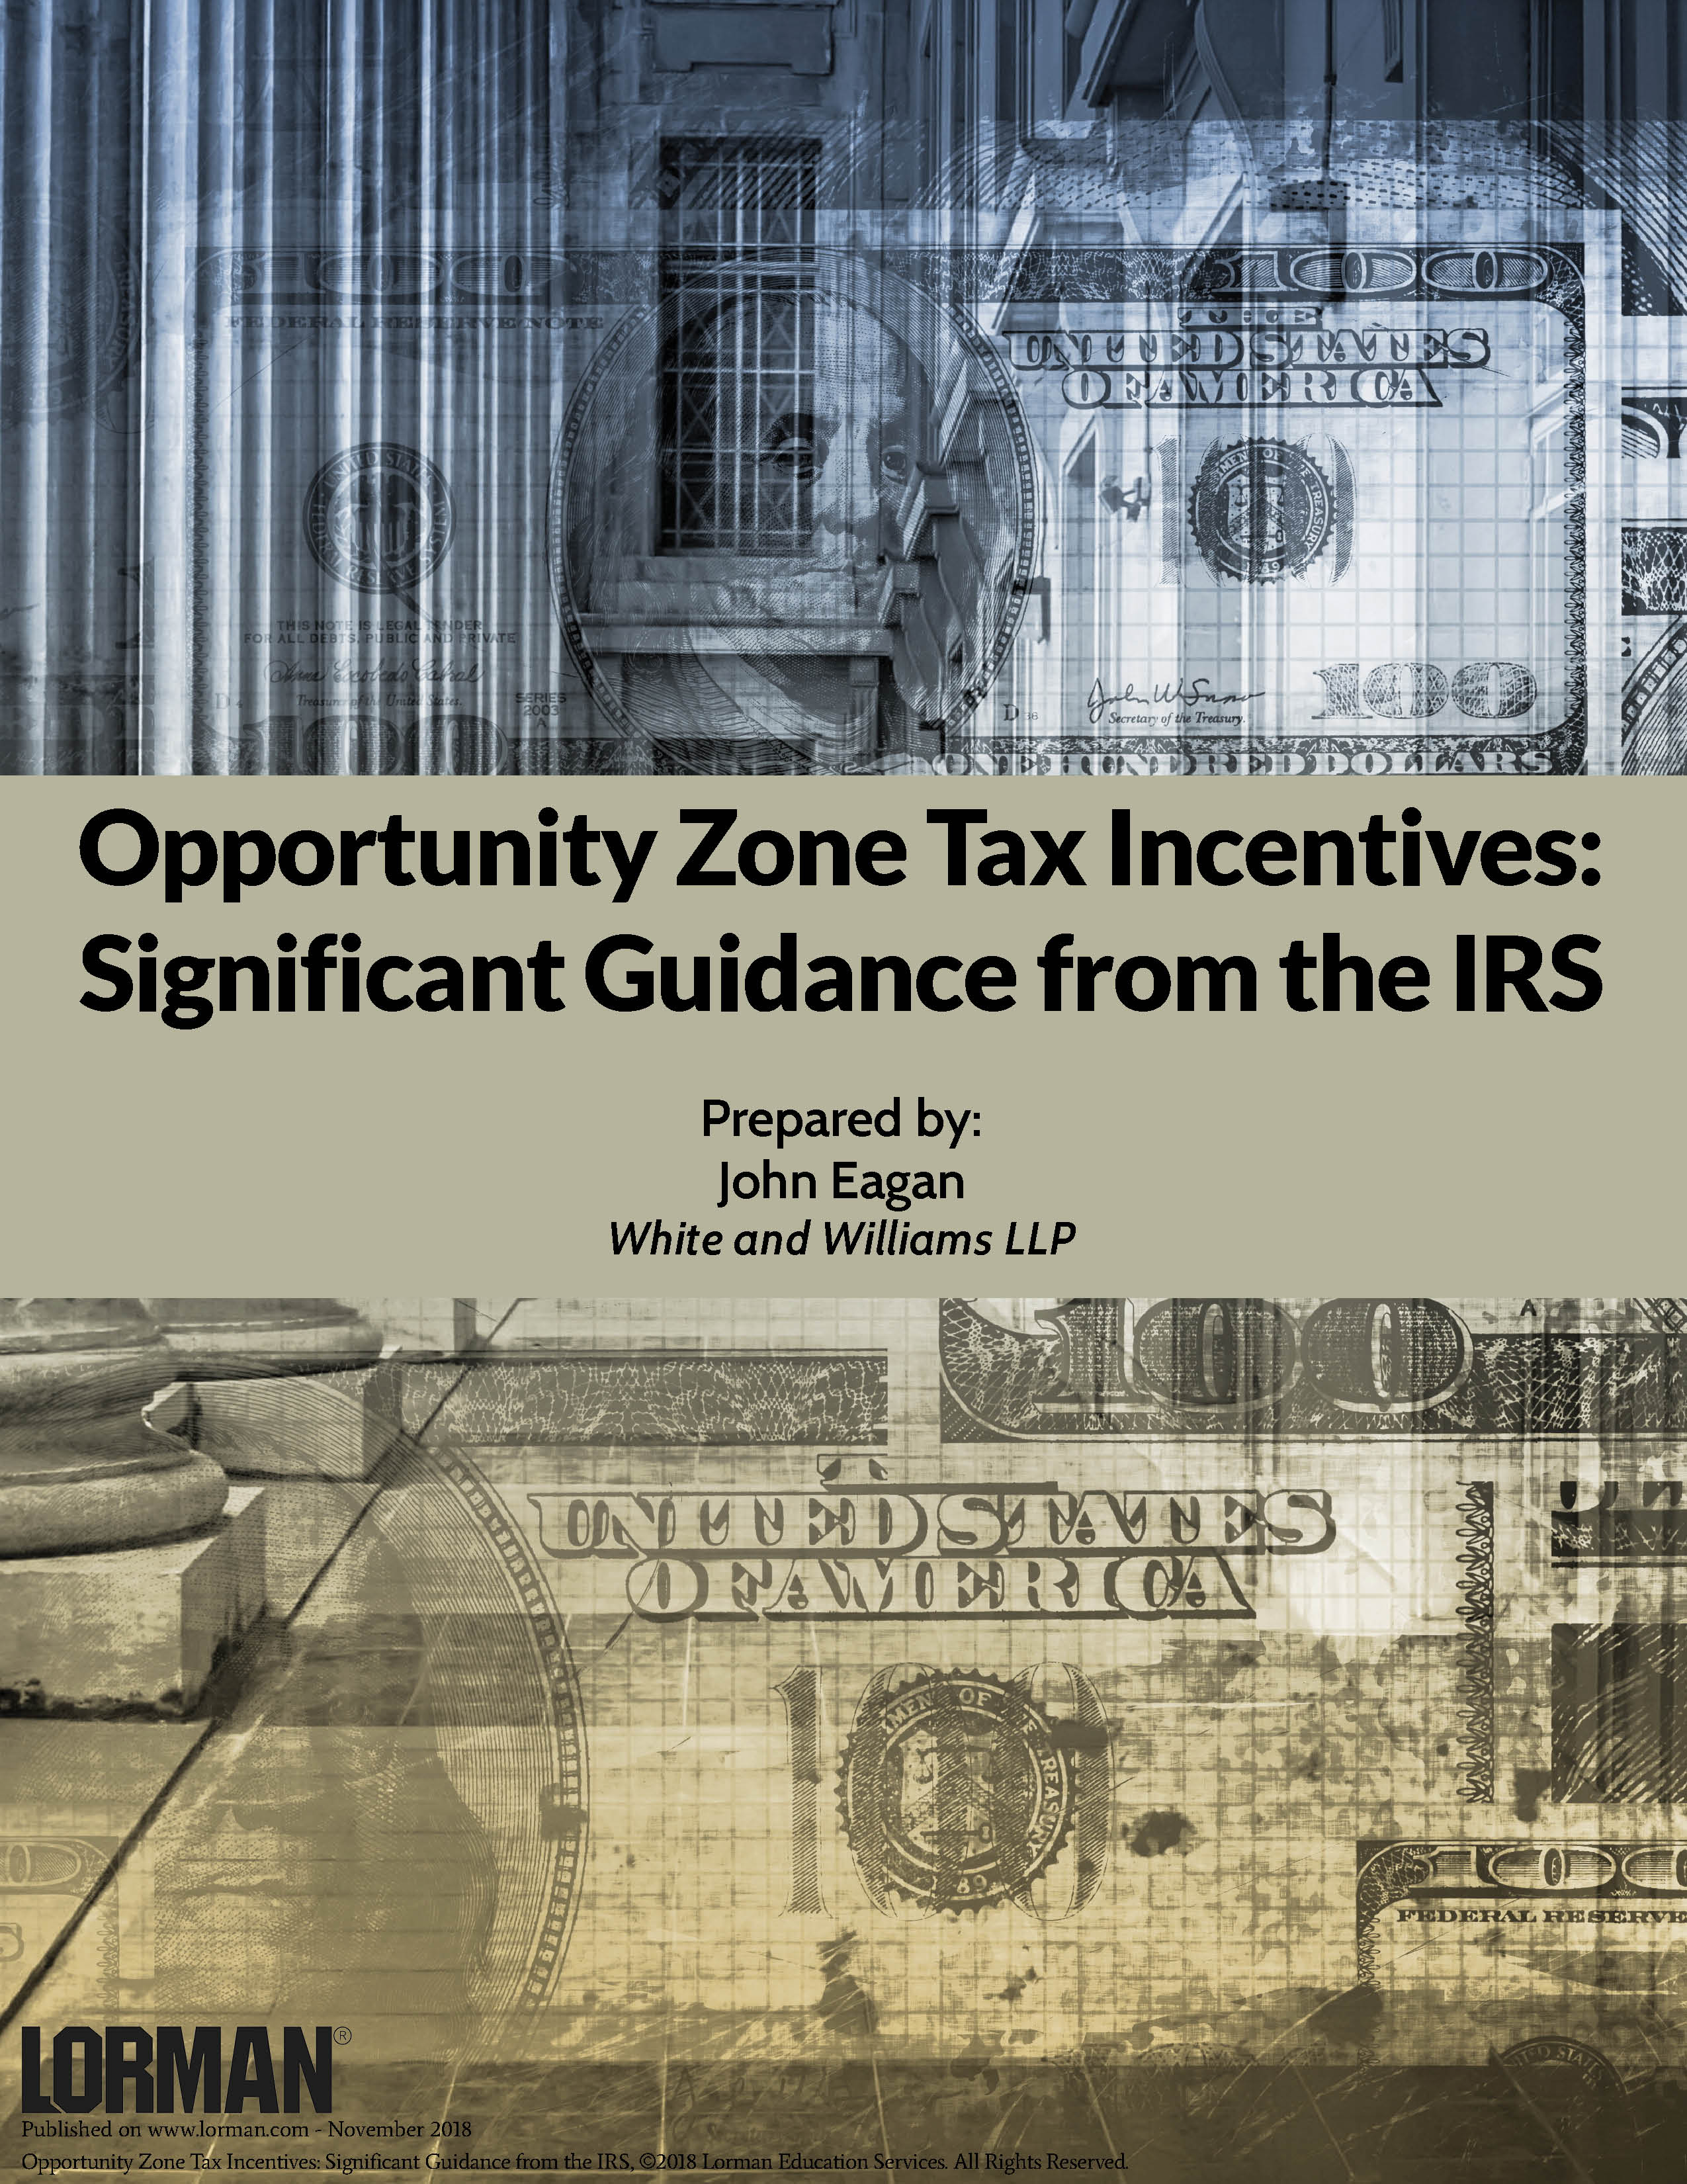 Opportunity Zone Tax Incentives: Significant Guidance from the IRS